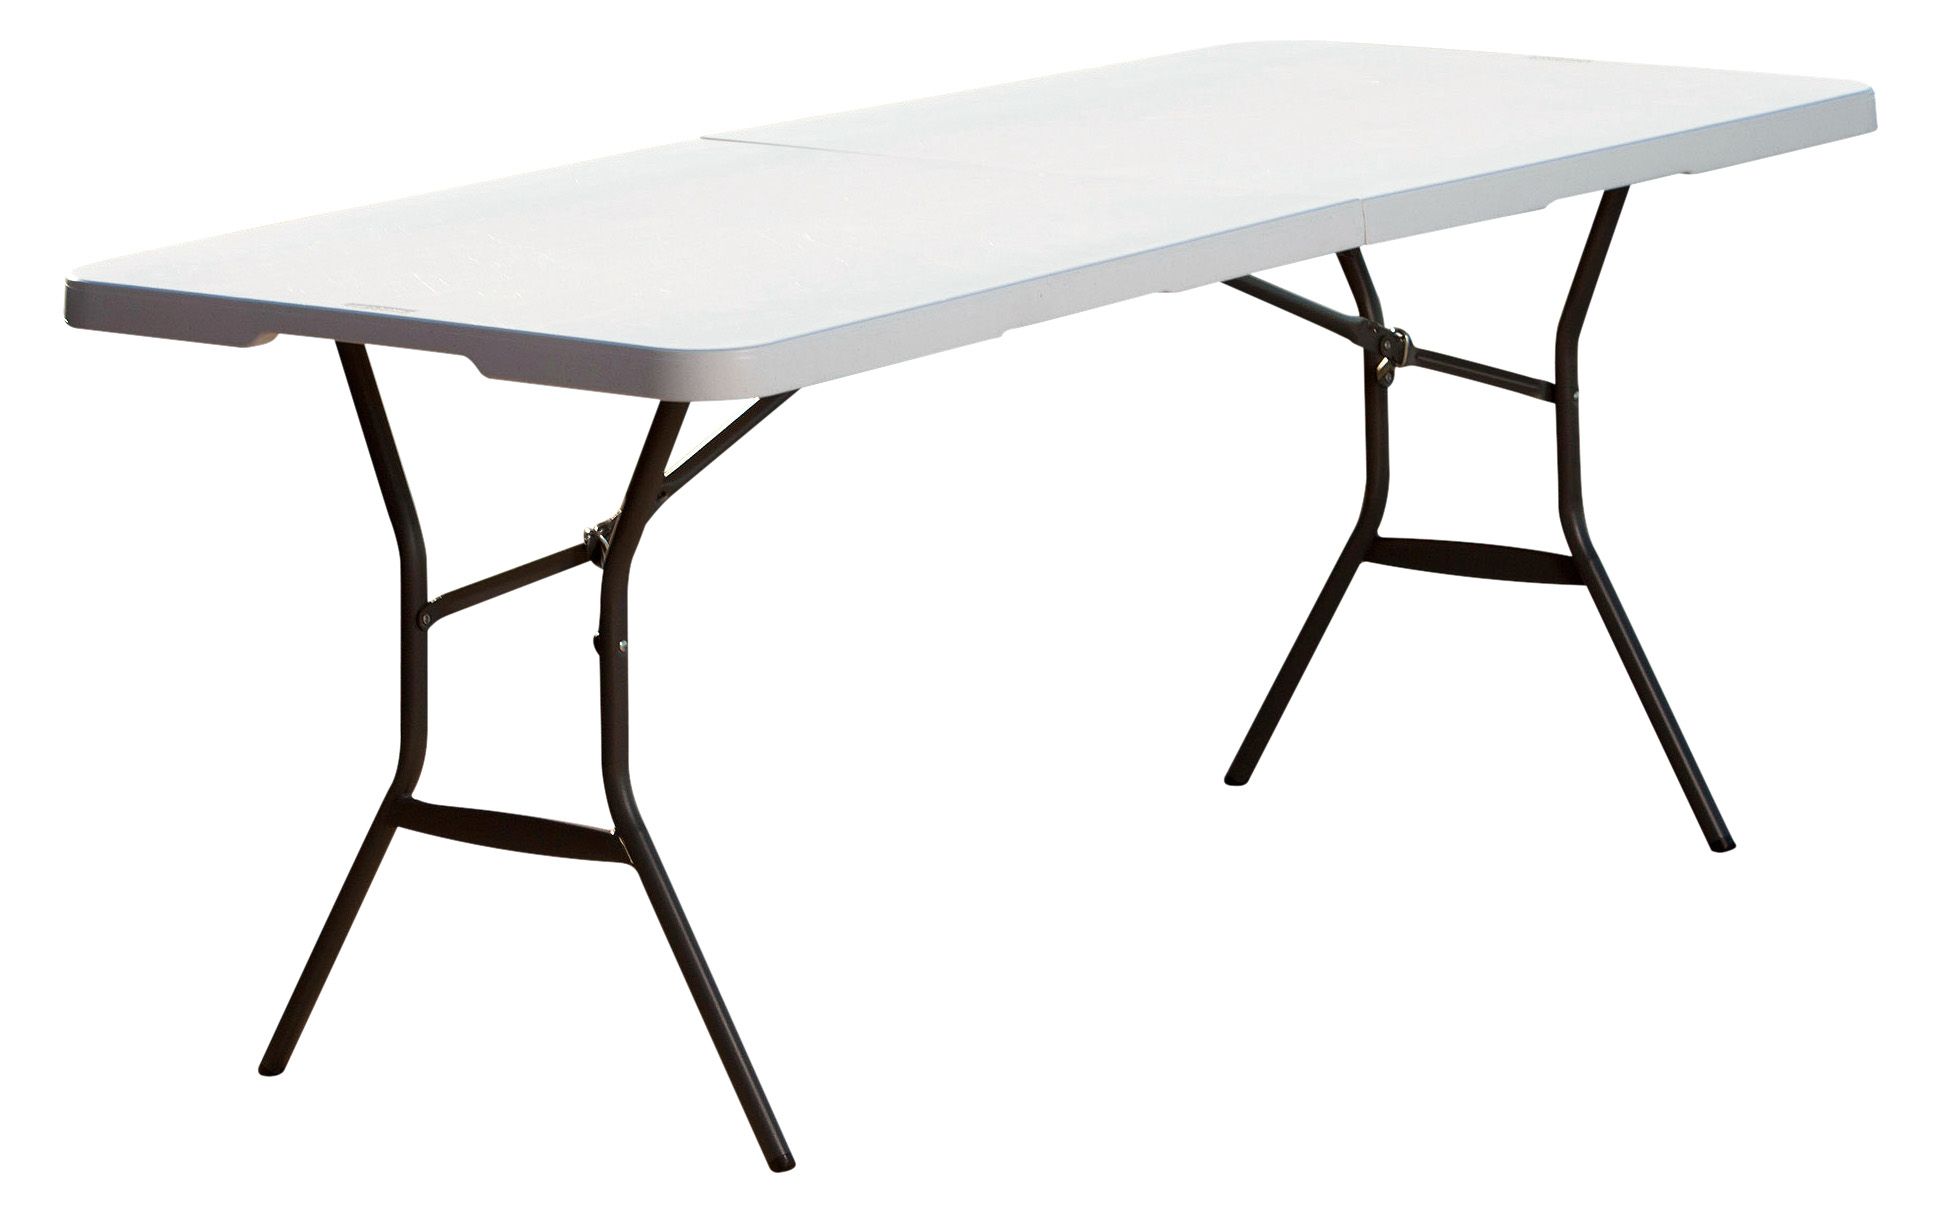 Lifetime Combo 6 Commercial Grade Folding Table And 6 Folding Chairs White Granite • Display